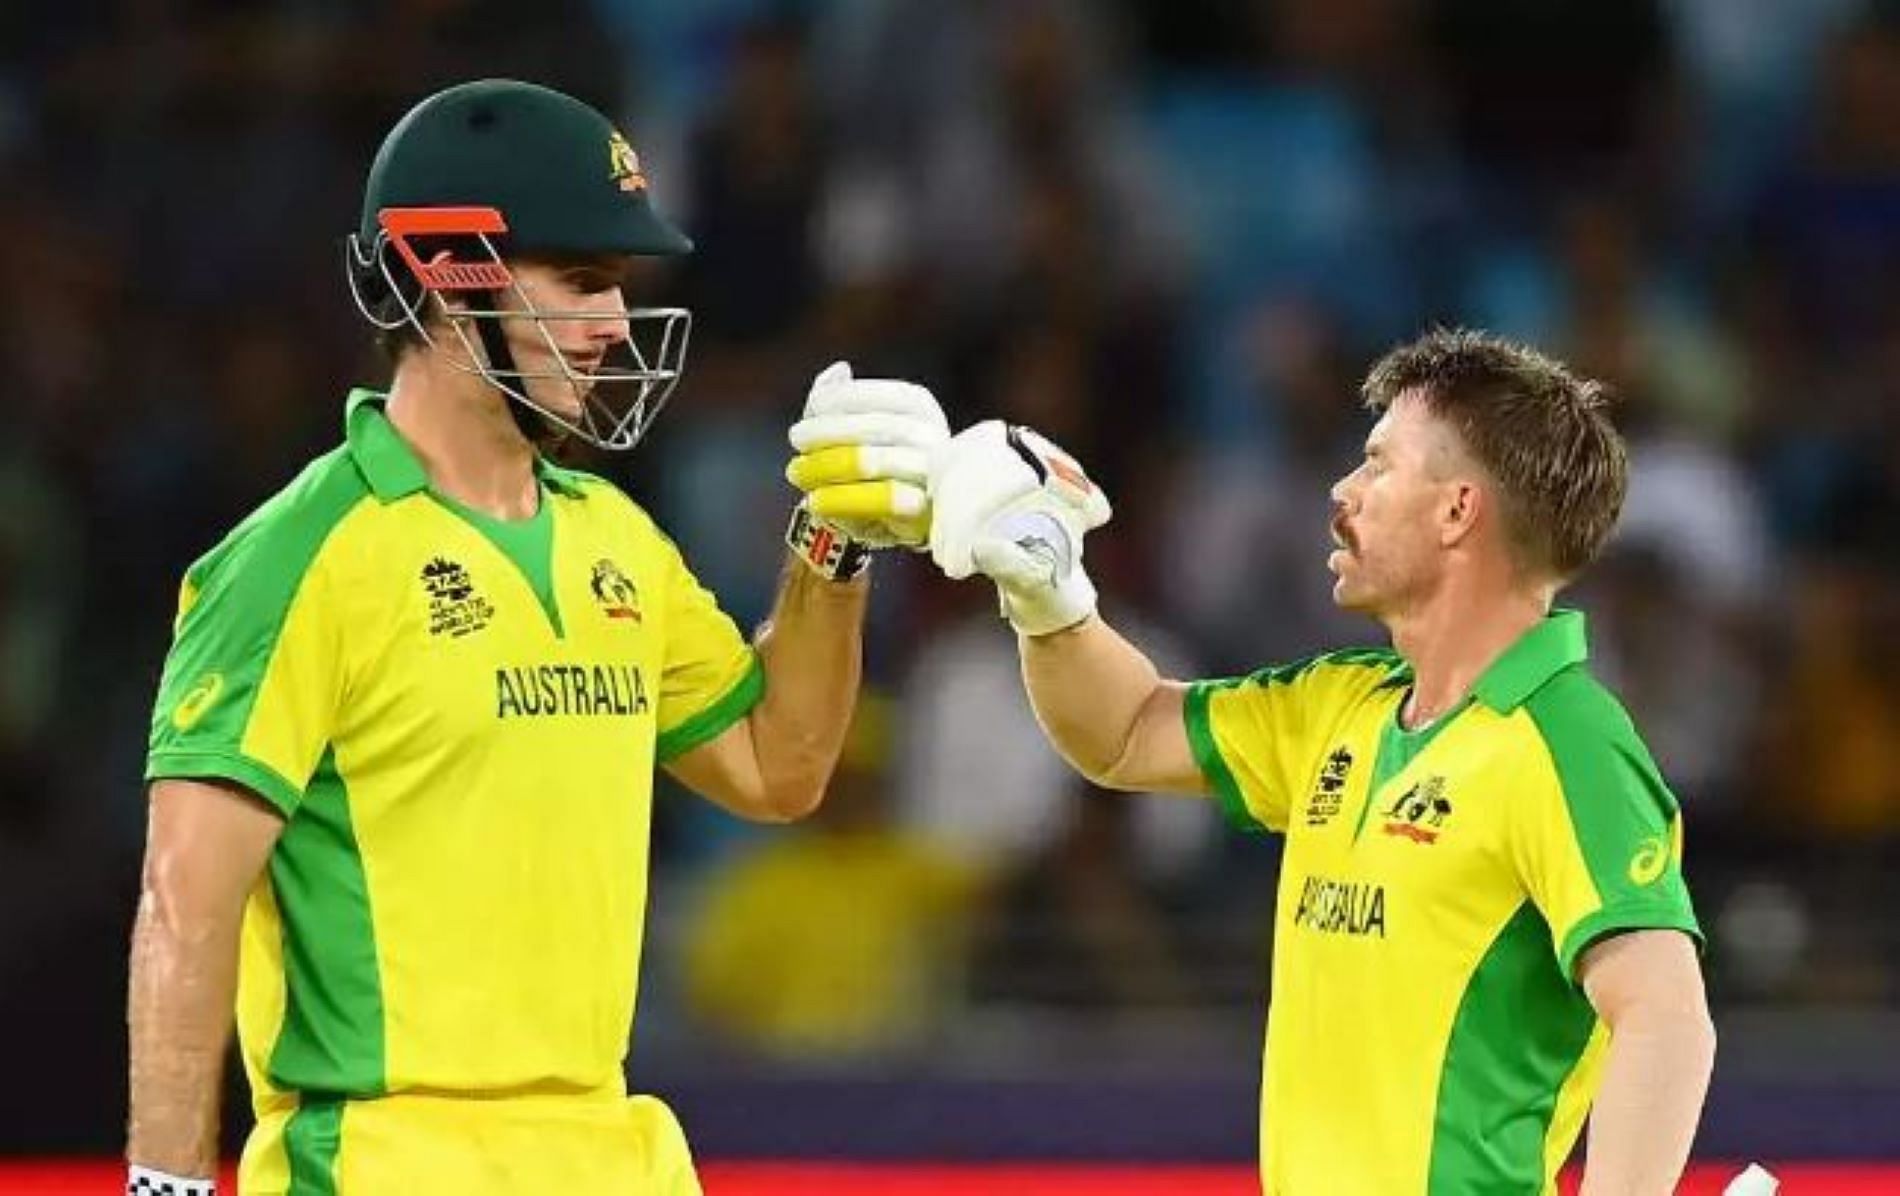 Marsh and Warner smashed the Indian bowlers in the recent ODI series.